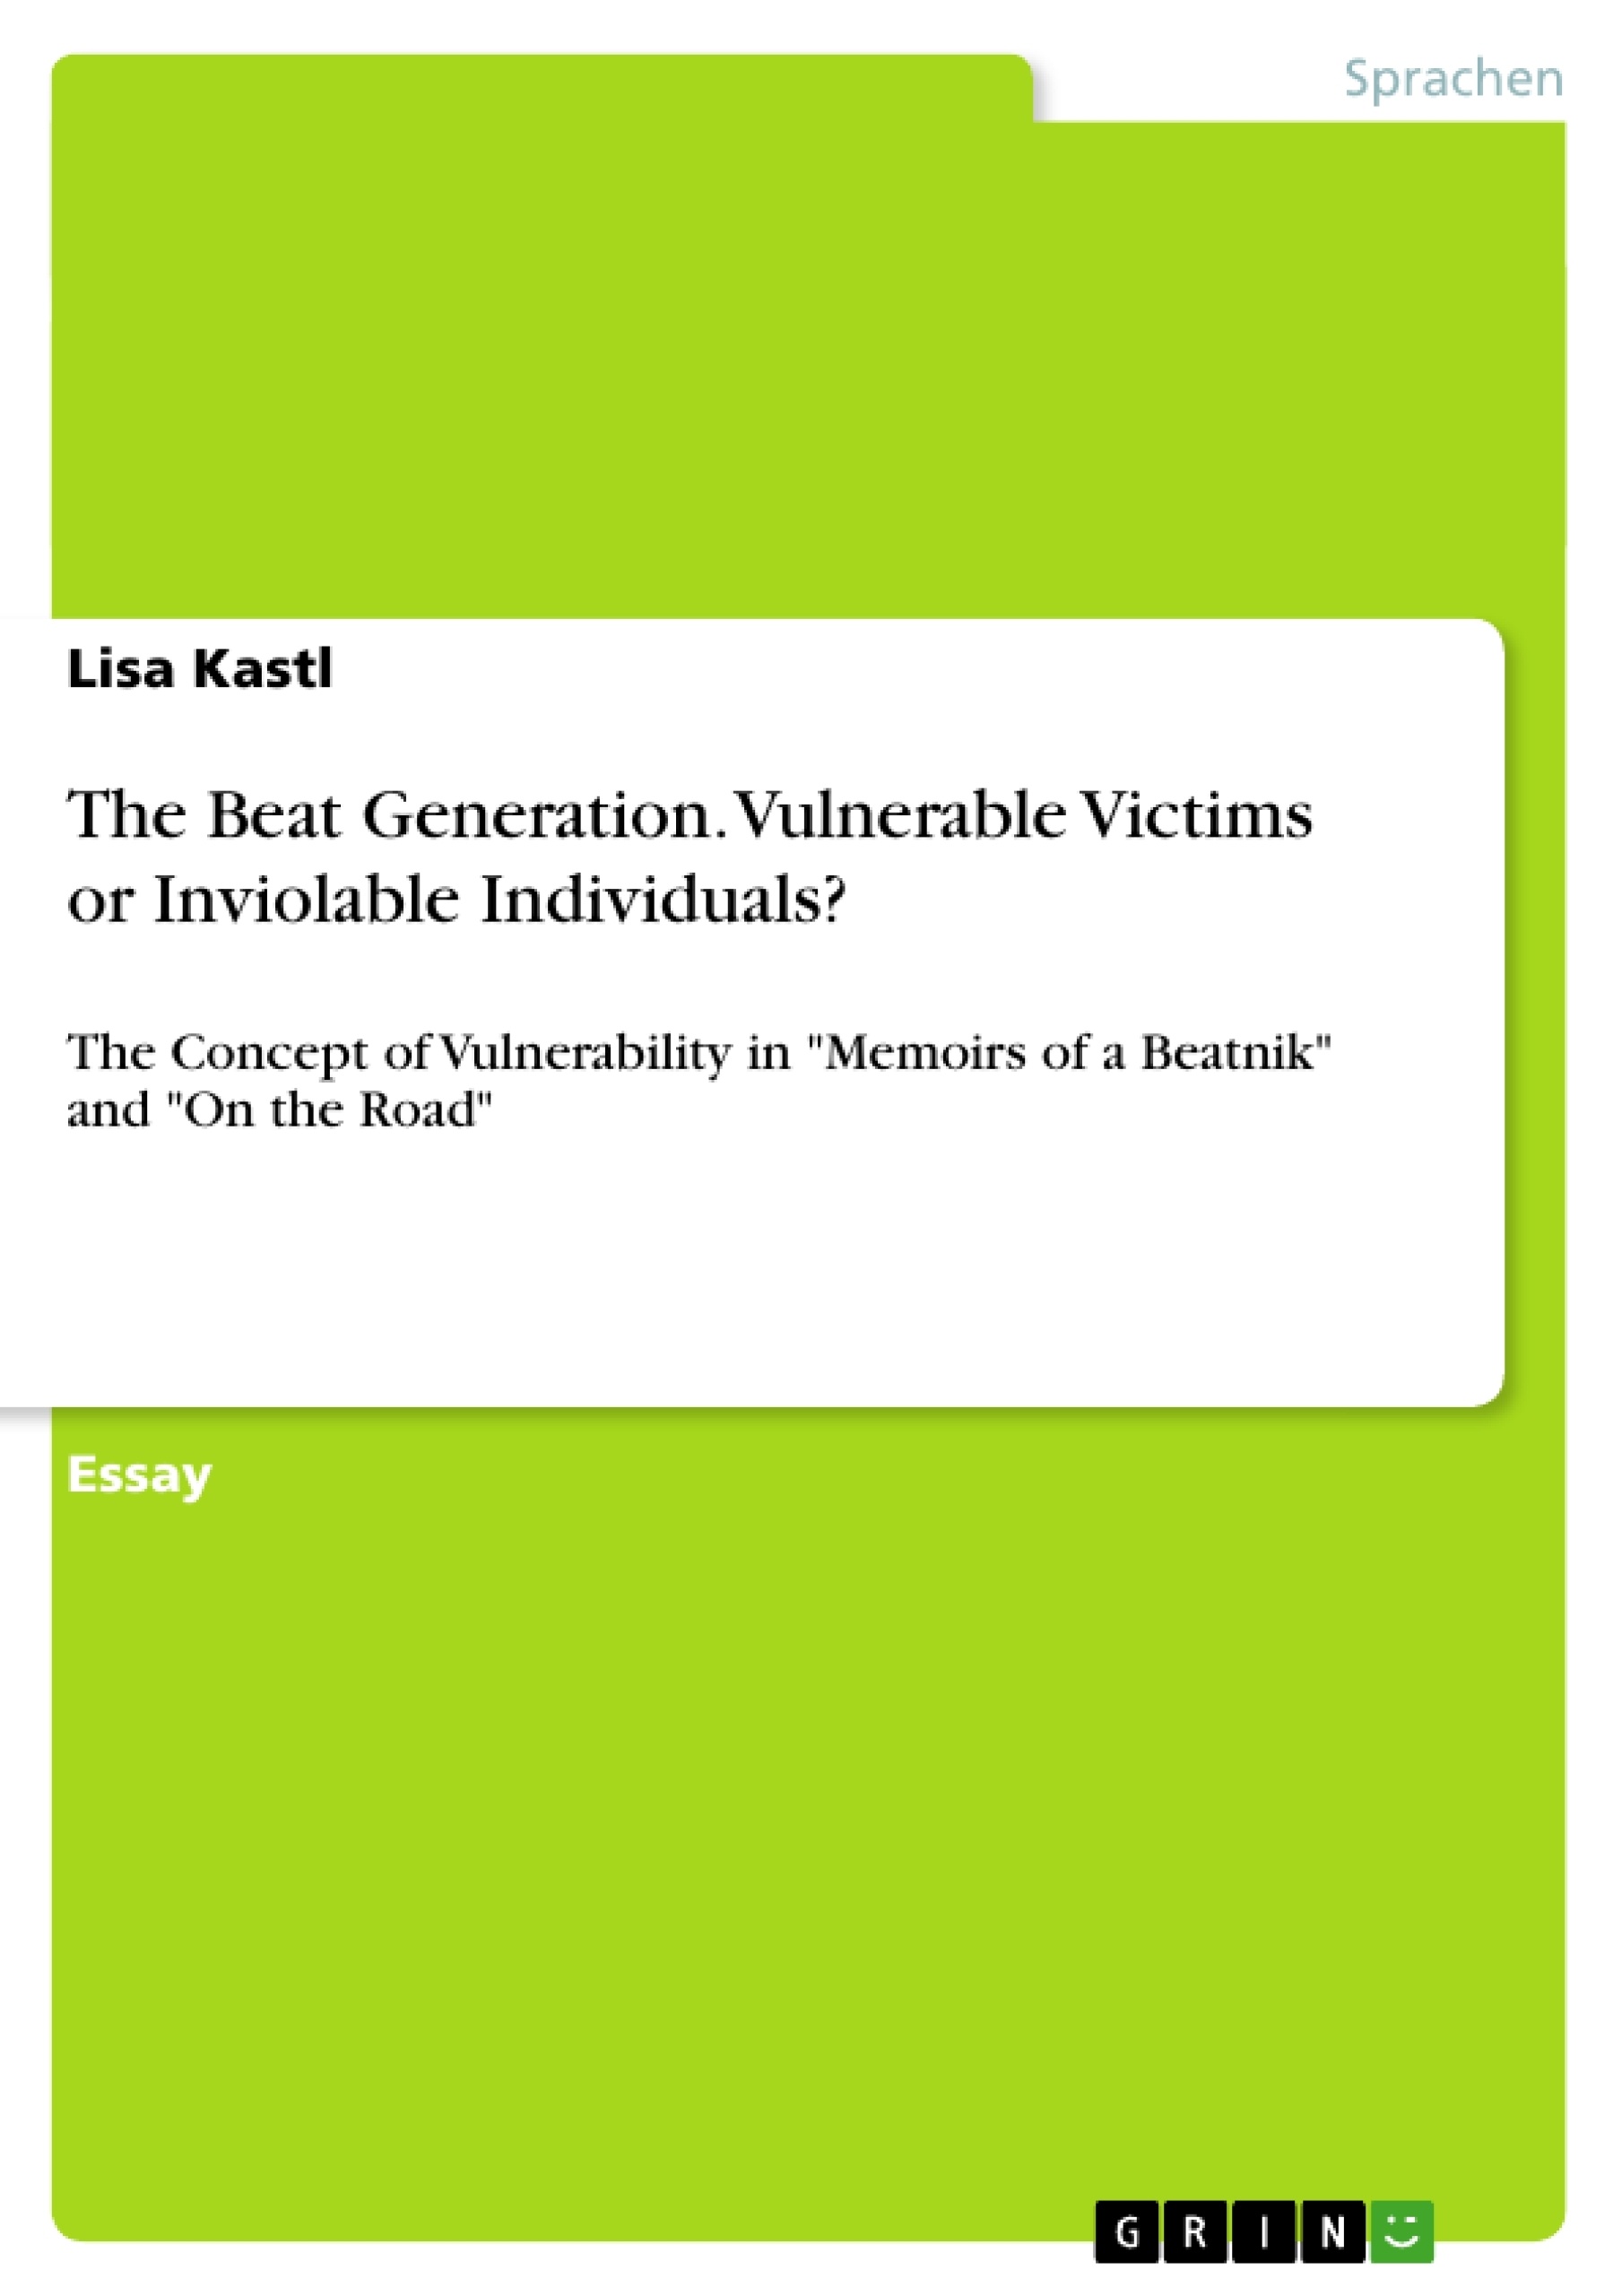 Titre: The Beat Generation. Vulnerable Victims or Inviolable Individuals?